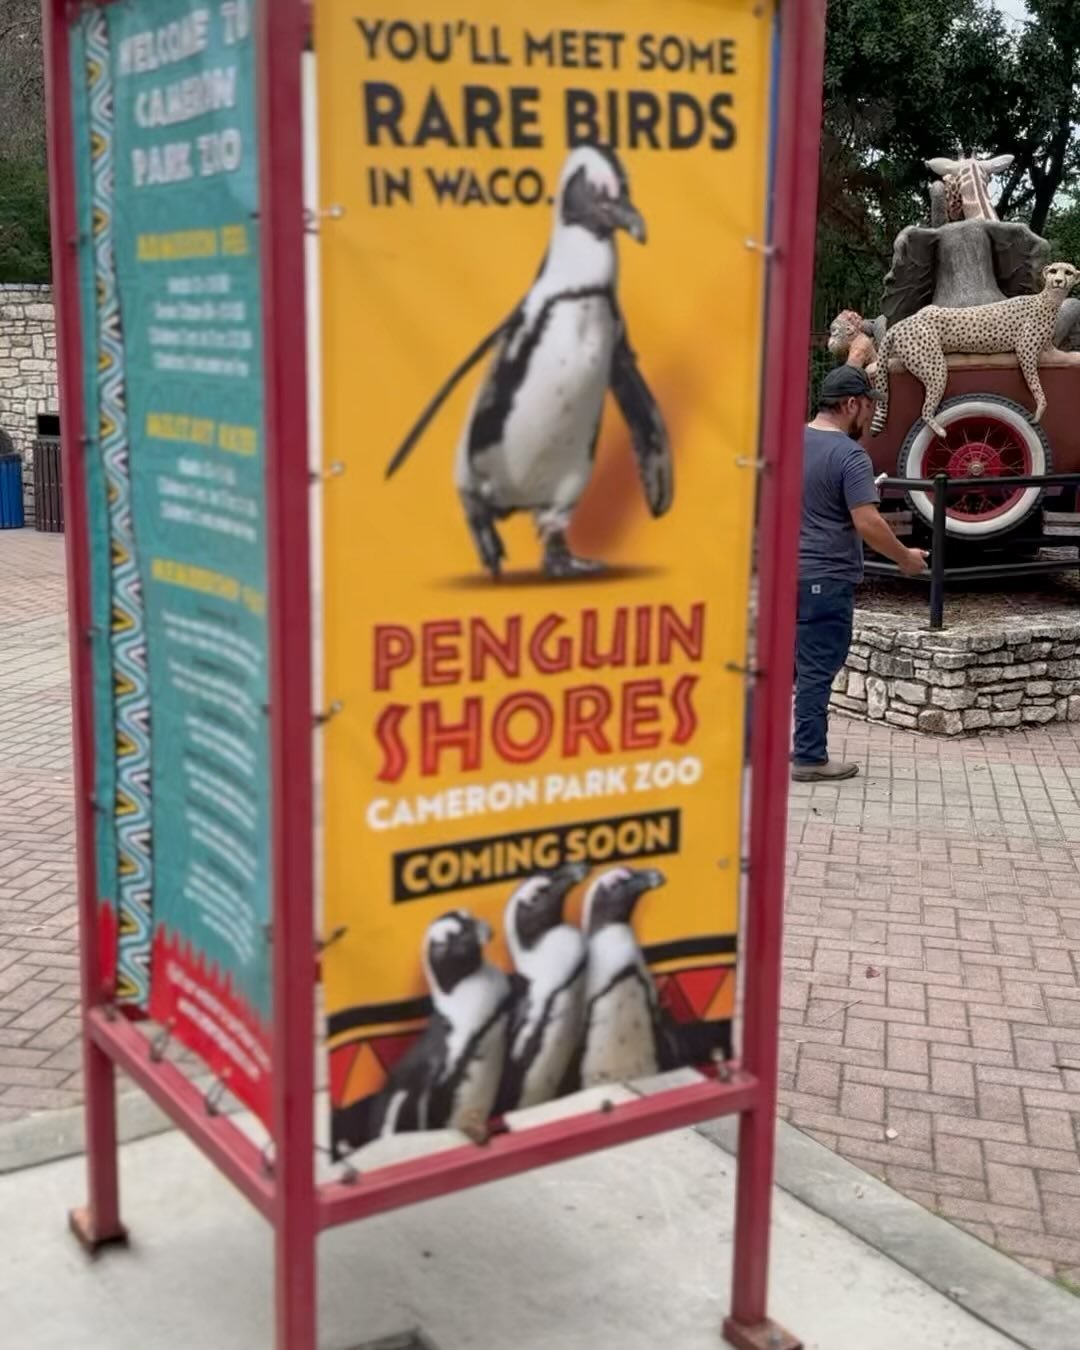 Seedhouser Cathi attended today&rsquo;s Central Texas PRSA chapter event where they got an exclusive sneak peek at the much-anticipated Penguin Shores exhibit, currently under construction.

Hearing directly from the @cpzoo leaders, the group learned